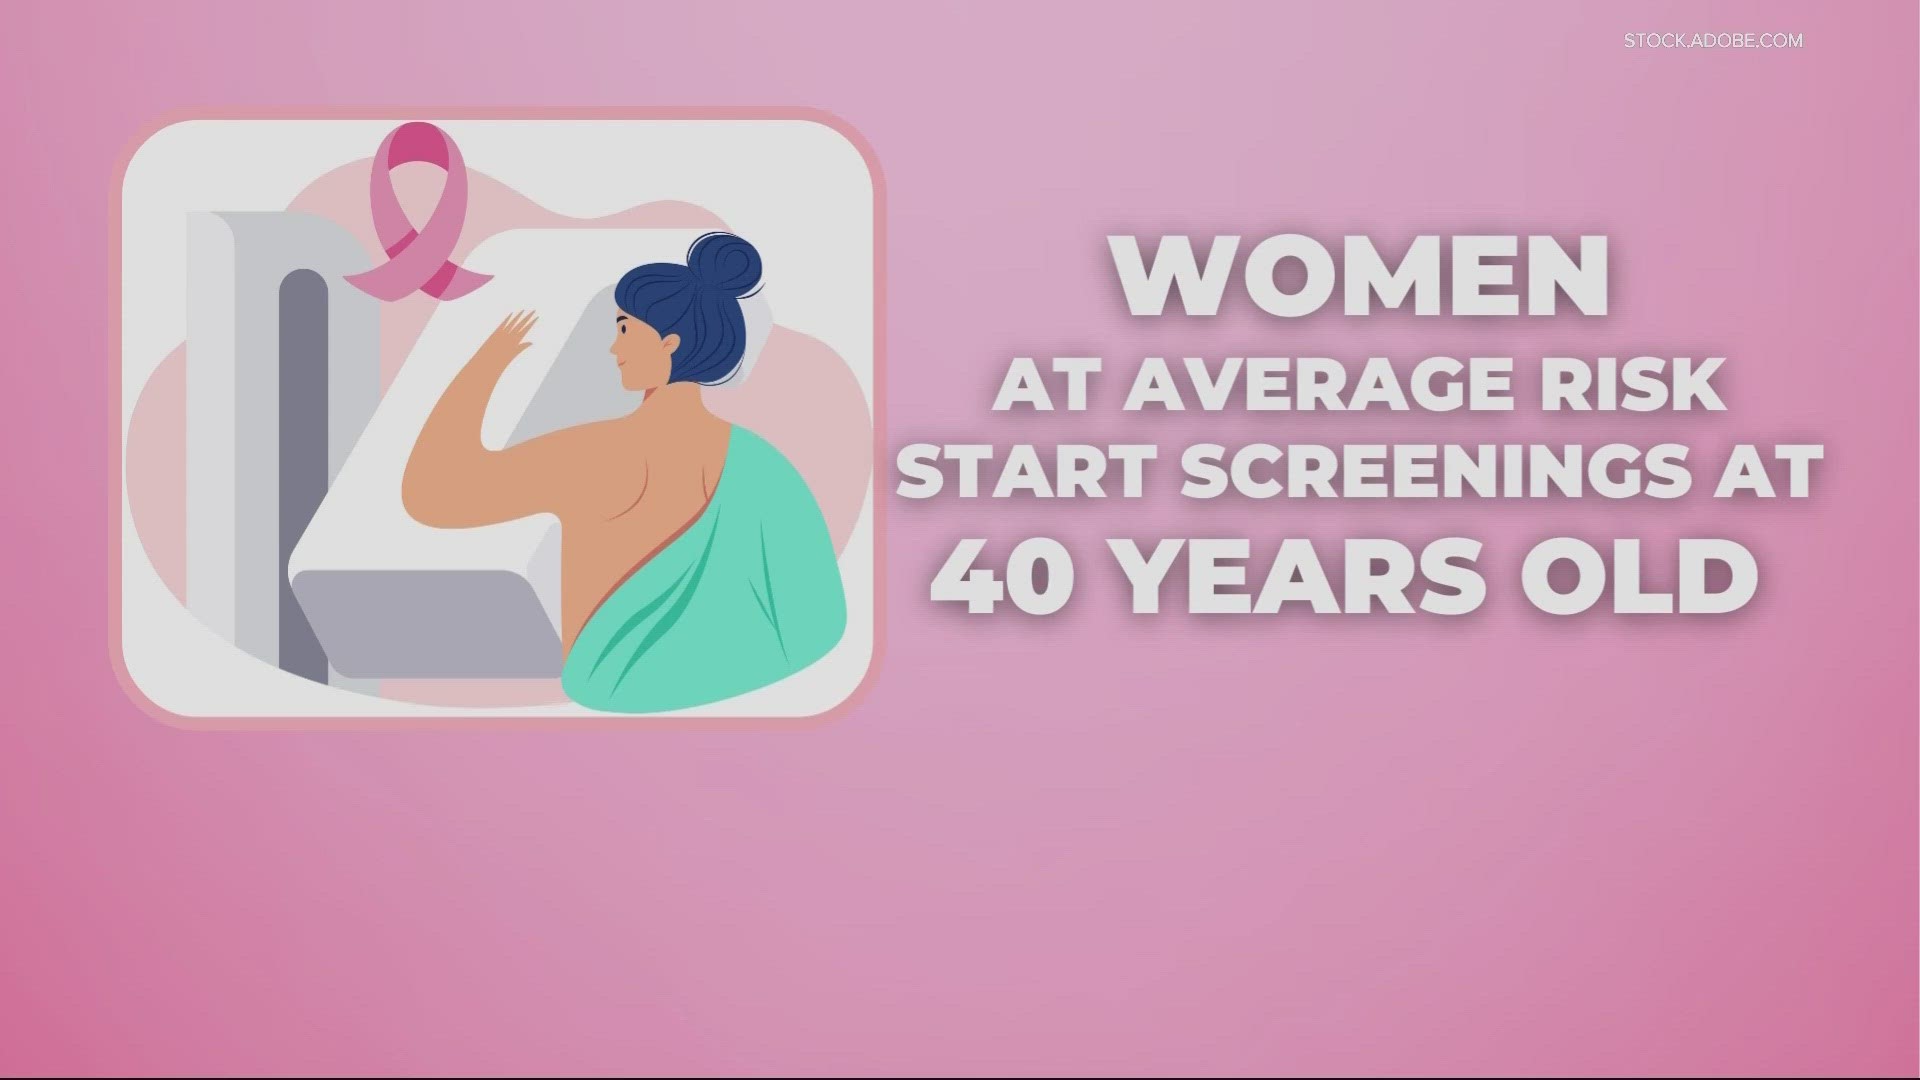 1 in 8 will be diagnosed with breast cancer in their lifetime. Here's what to know.